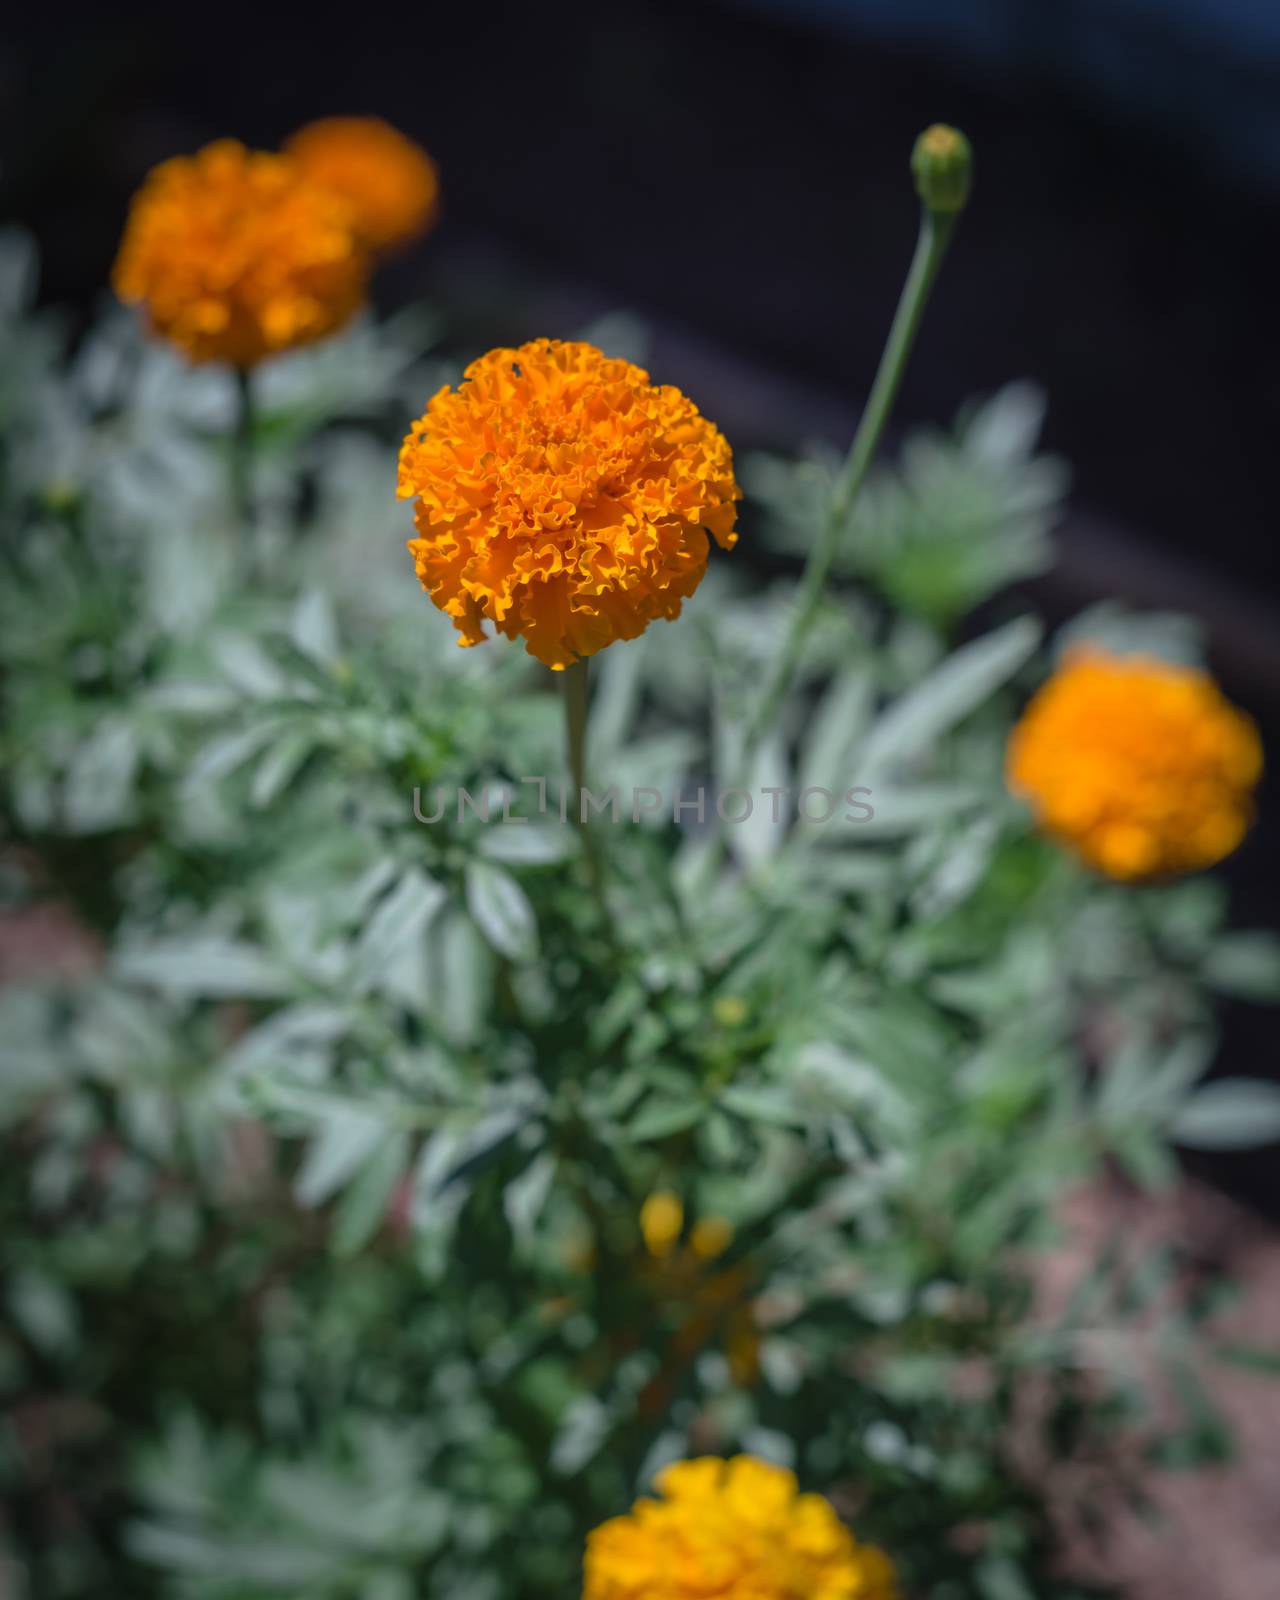 Blossom orange and yellow marigold blossom on raised bed garden near Dallas, Texas, USA by trongnguyen